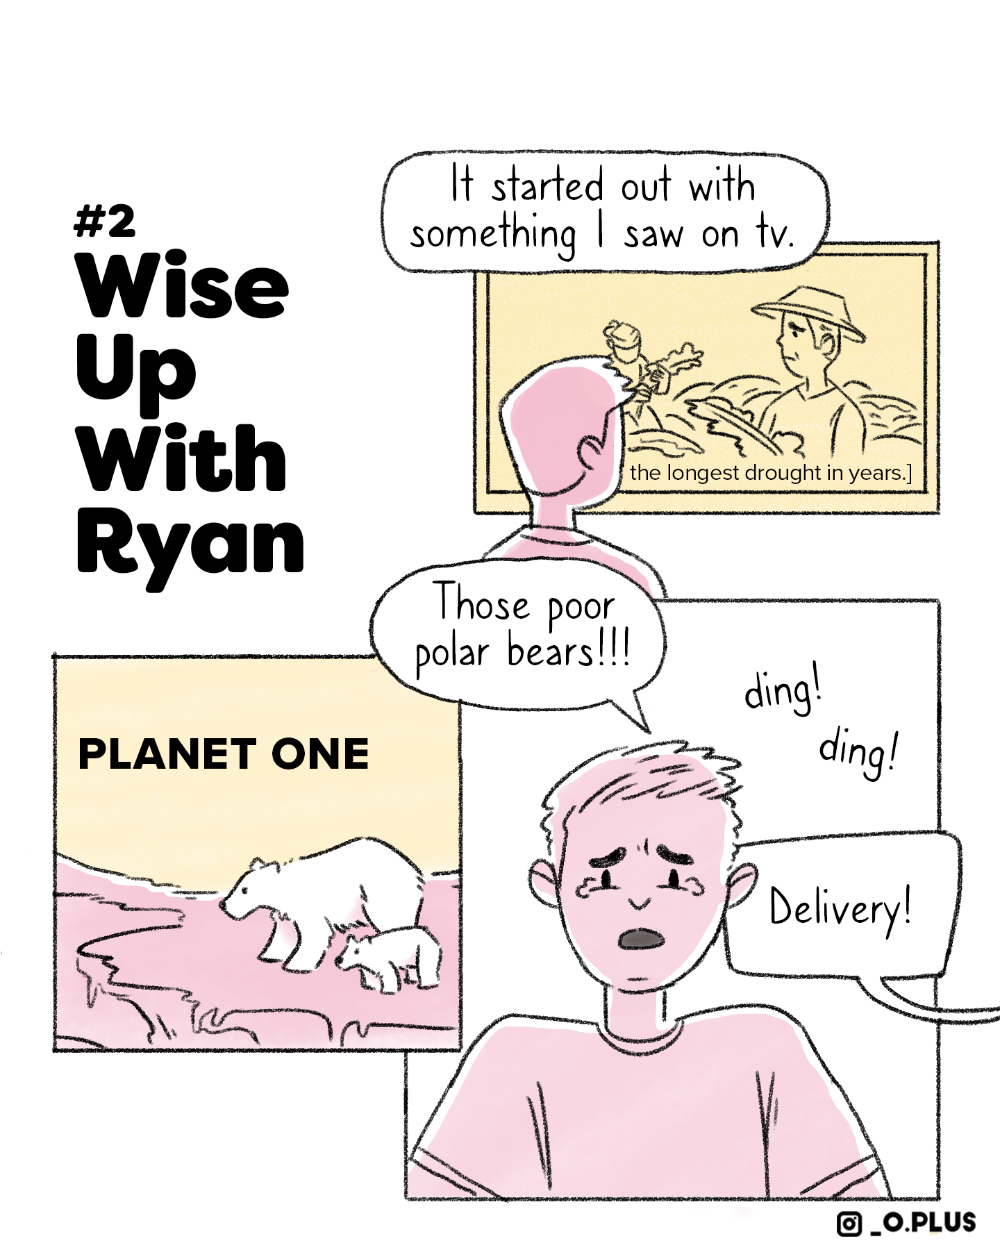 Wise up with Ryan - Episode 2 - Comic 1